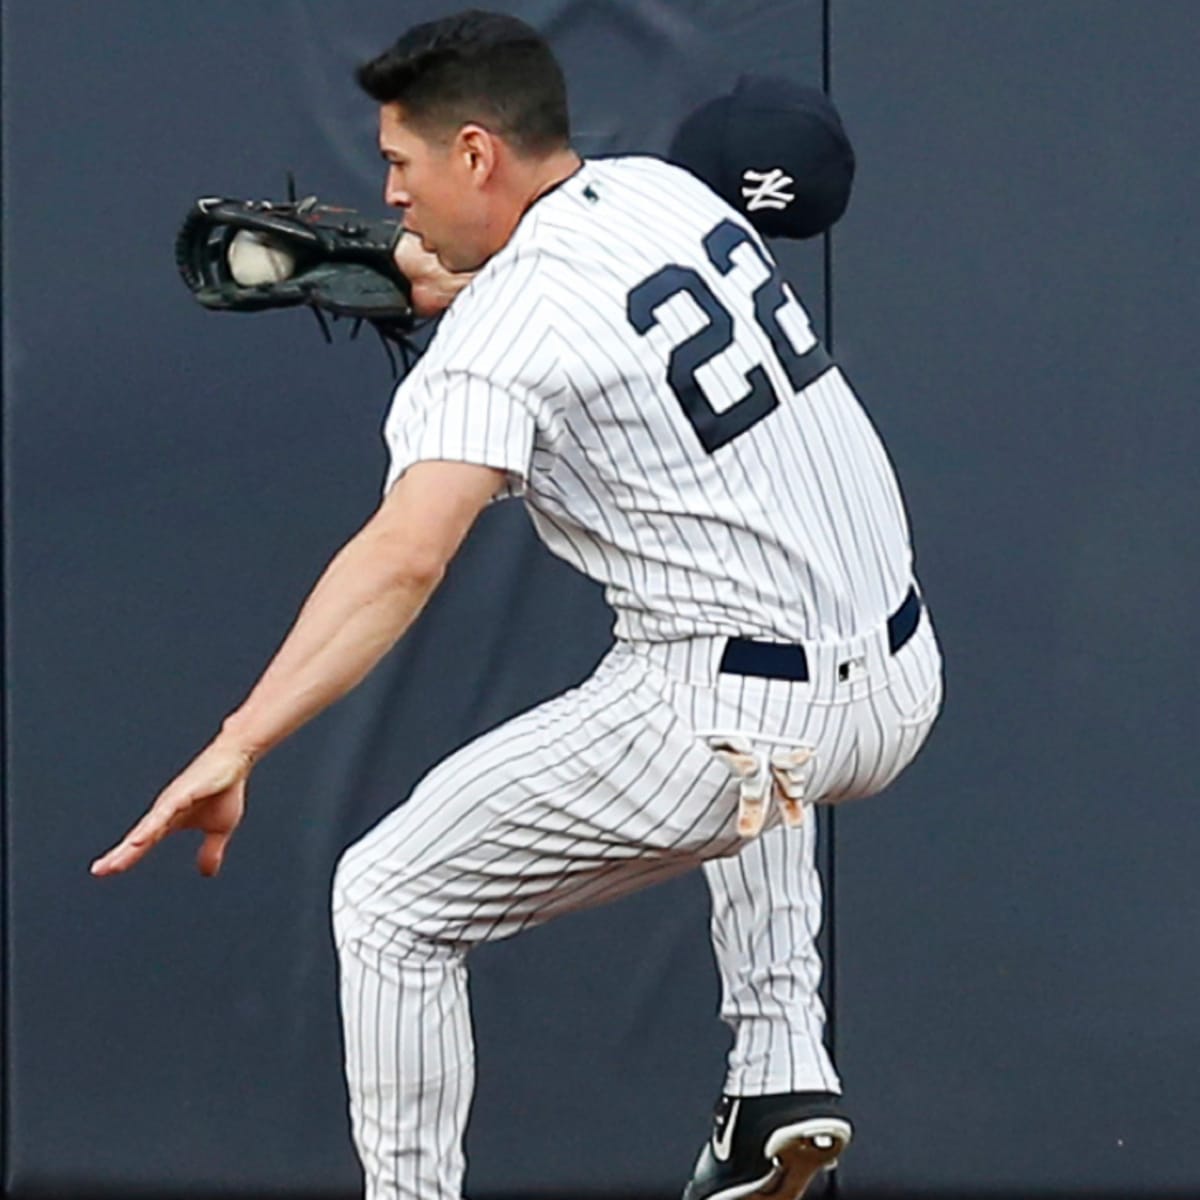 Jacoby Ellsbury concussed after slamming into wall - SI Kids: Sports News  for Kids, Kids Games and More